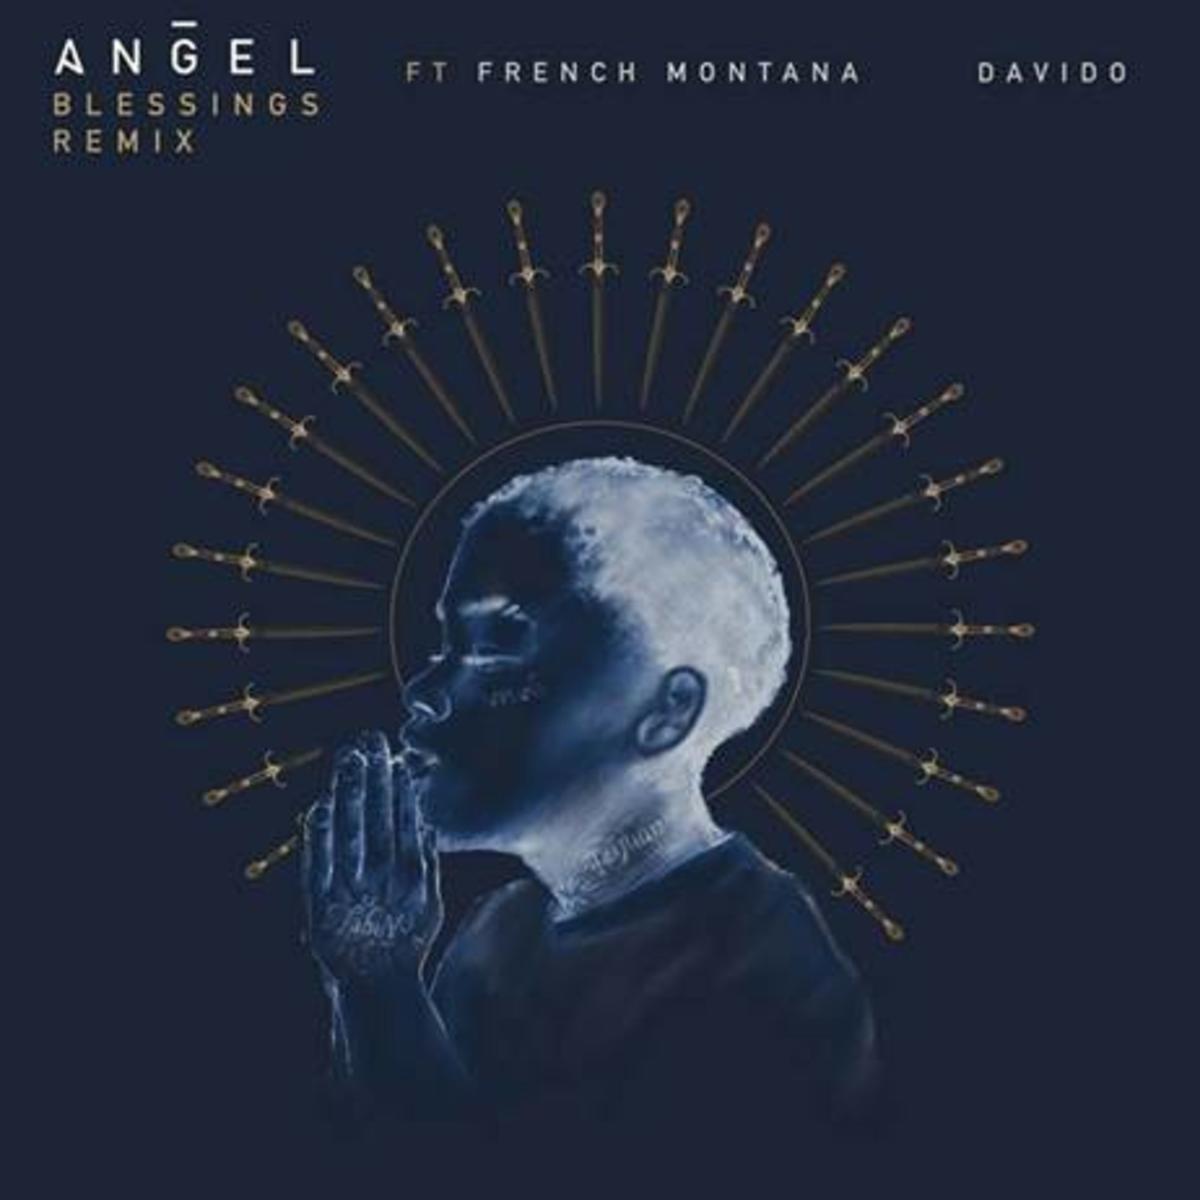 French Montana & Davido Hop-On Angel’s “Blessings”